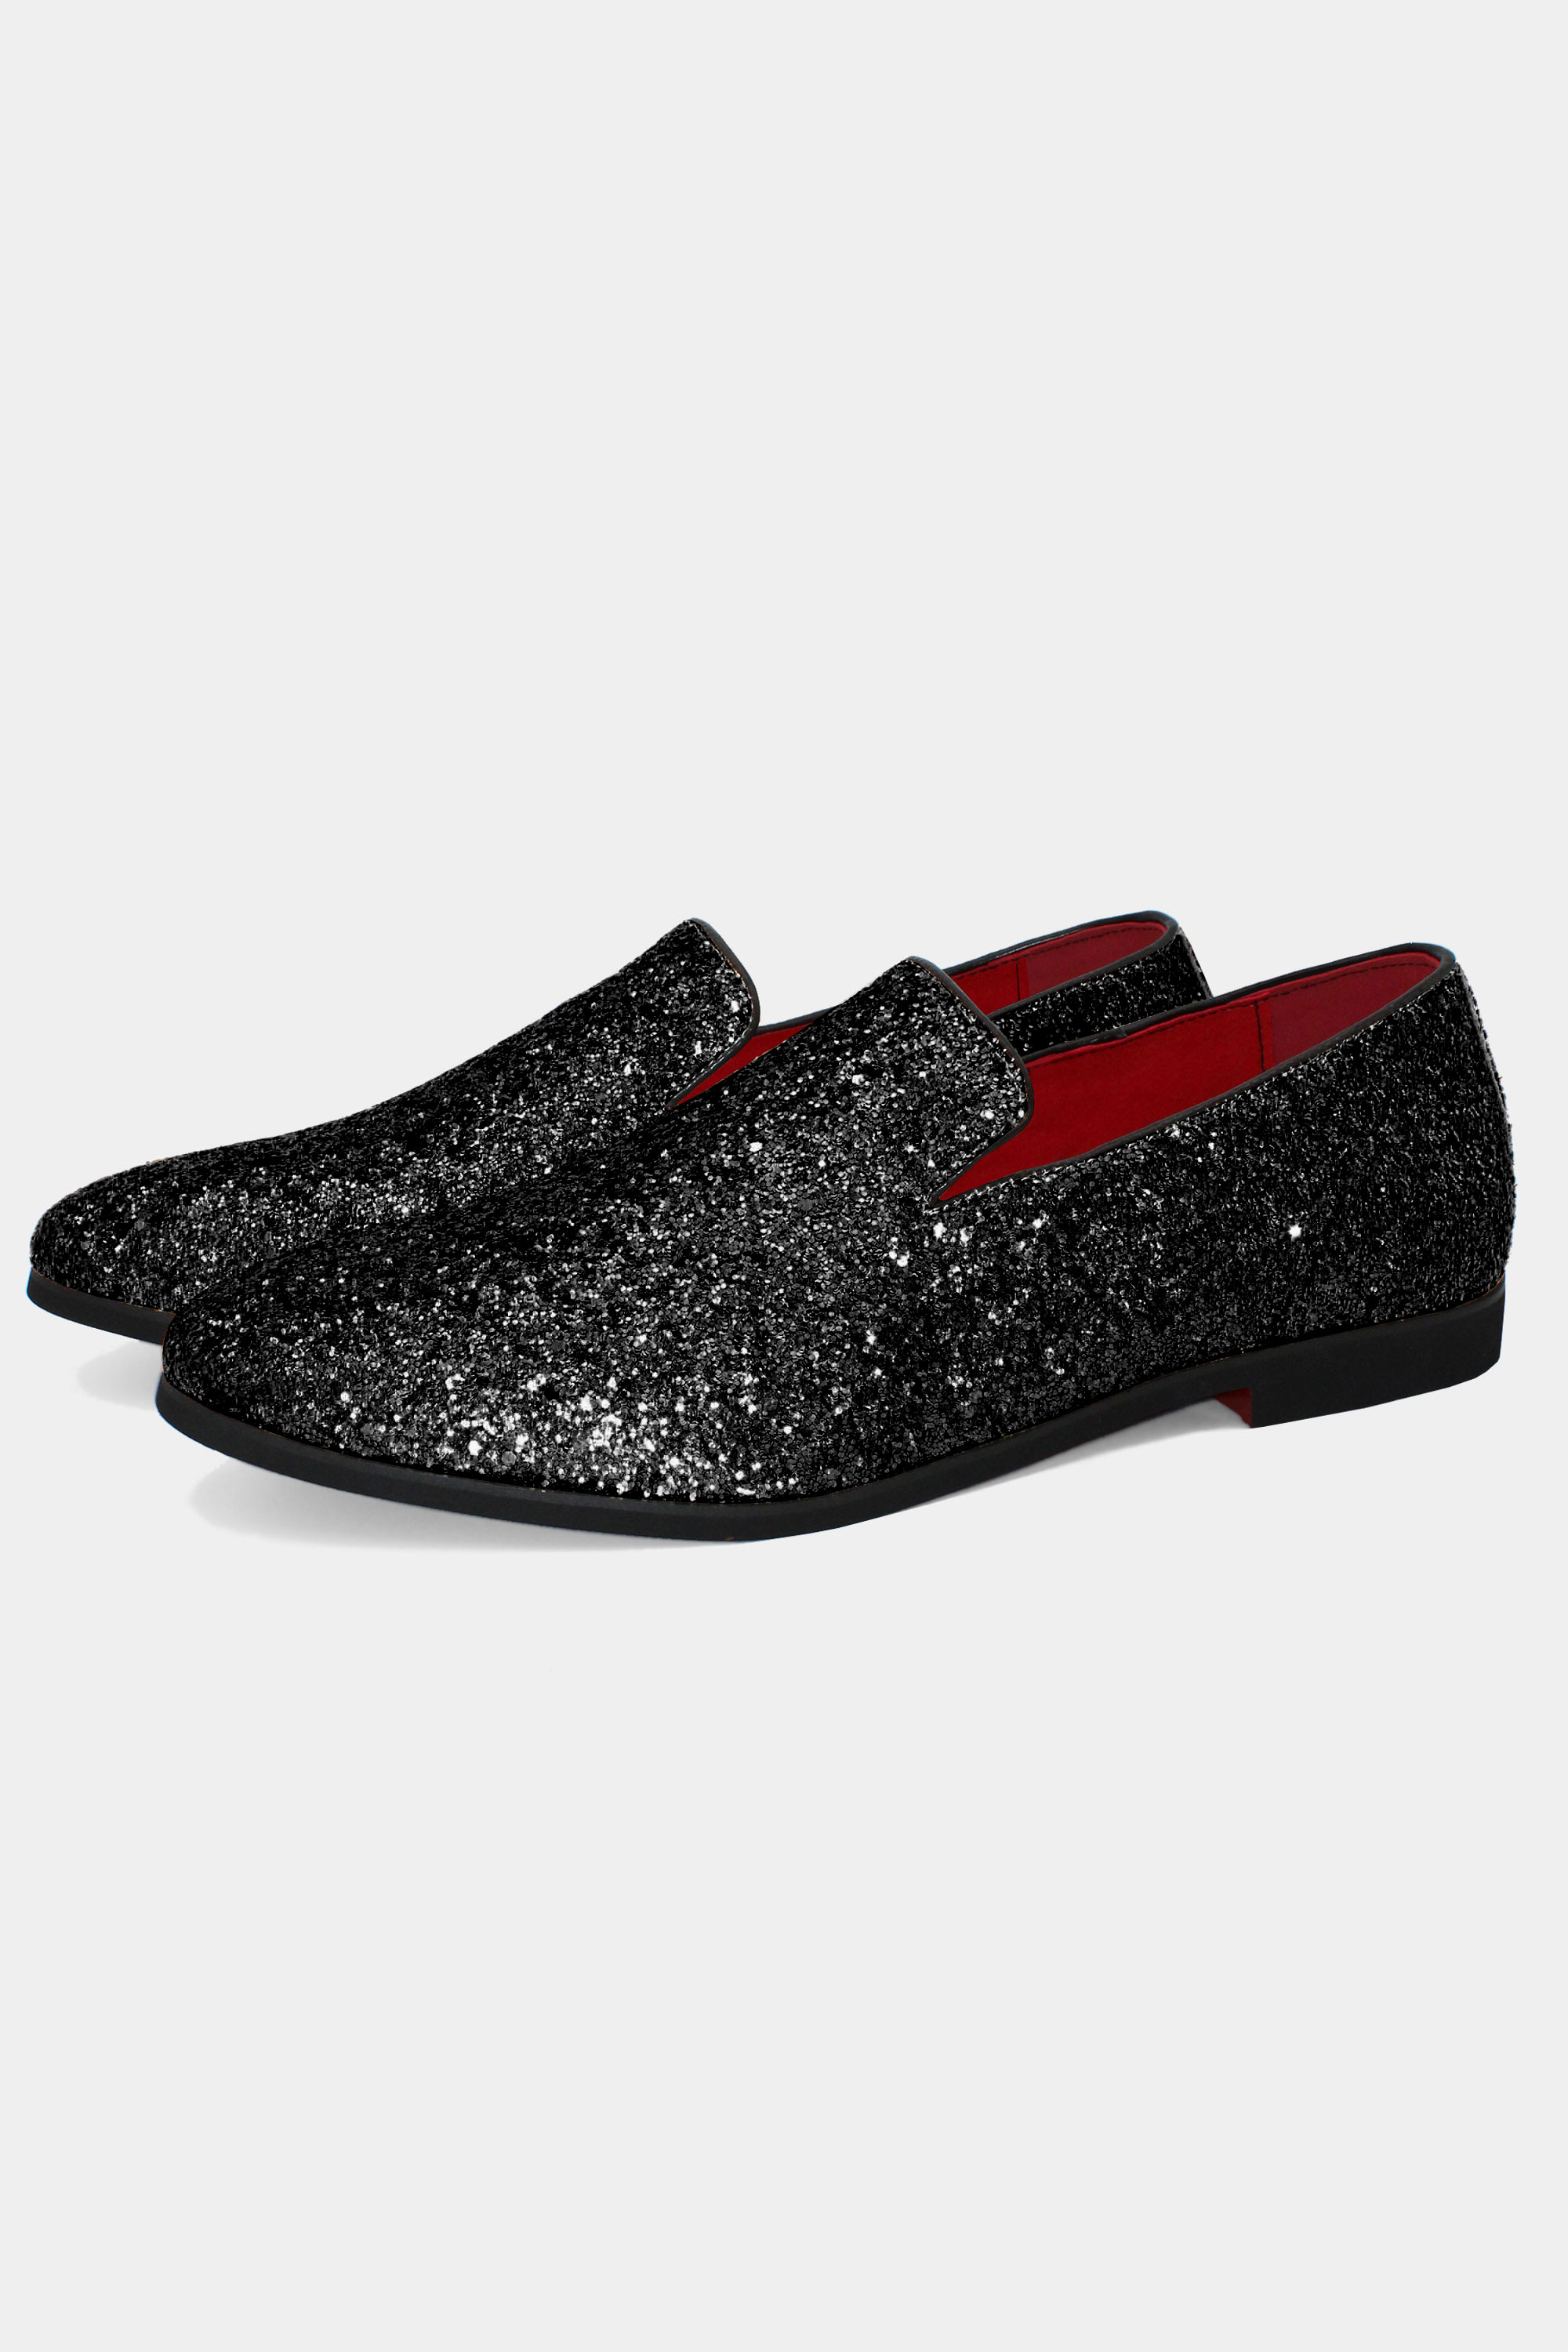 Mens Red Glitter Loafers Modern Dress Shoe Prom Wedding Perfect Tux ...